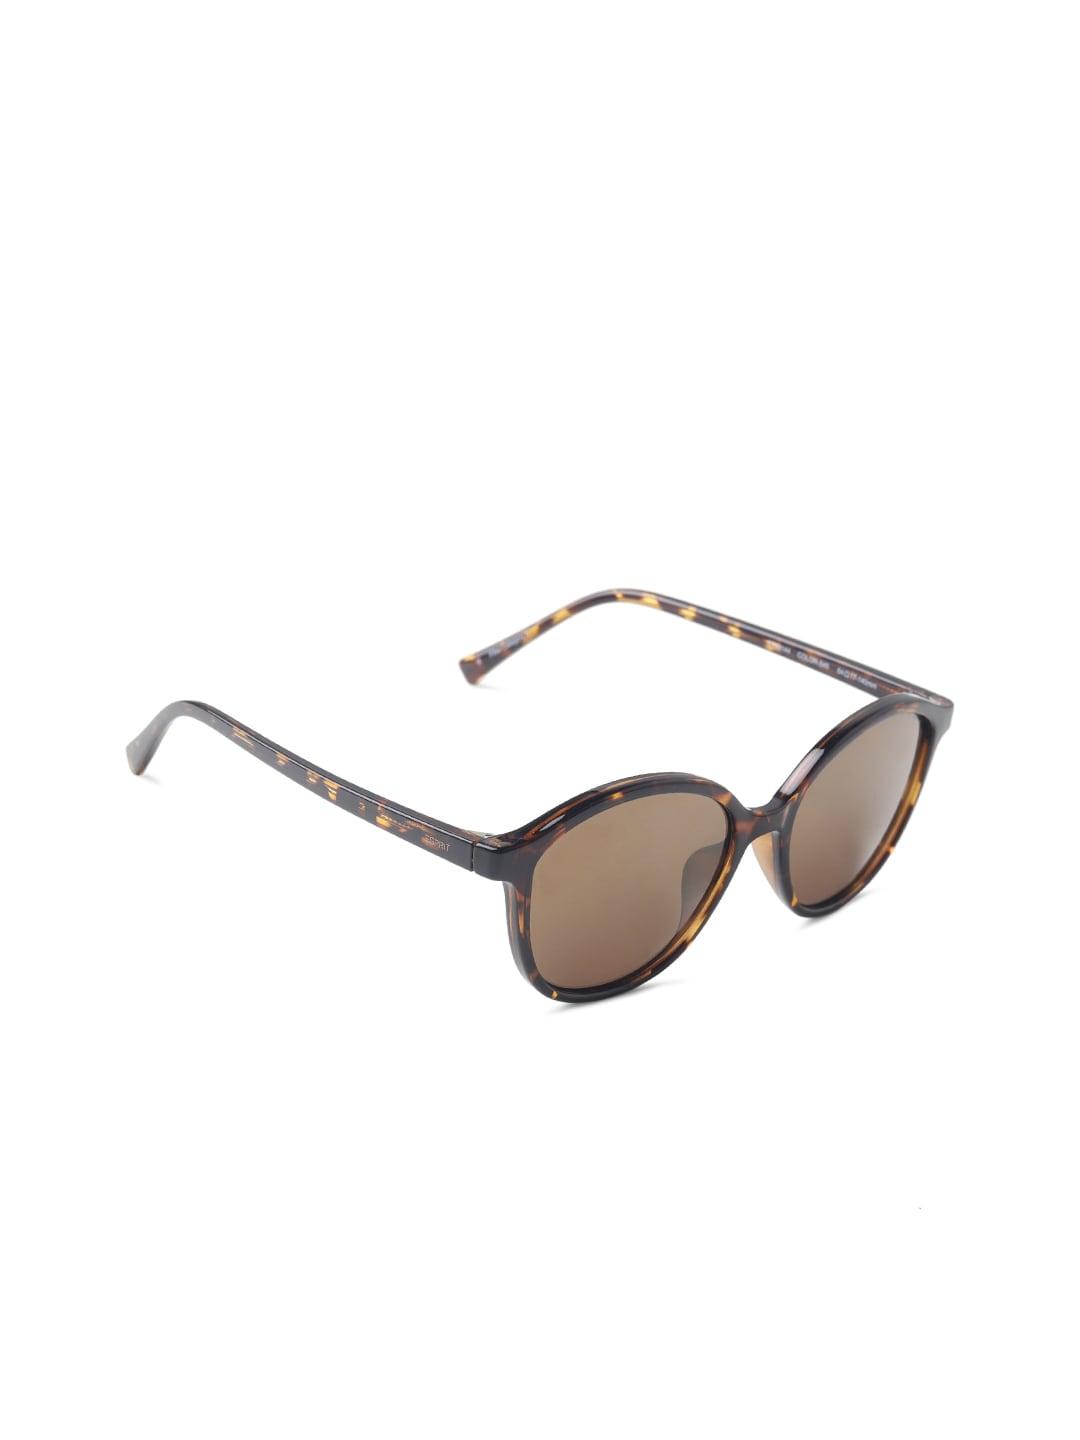 esprit-women-brown-lens-&-brown-round-sunglasses-with-uv-protected-lens-et39144-54-545